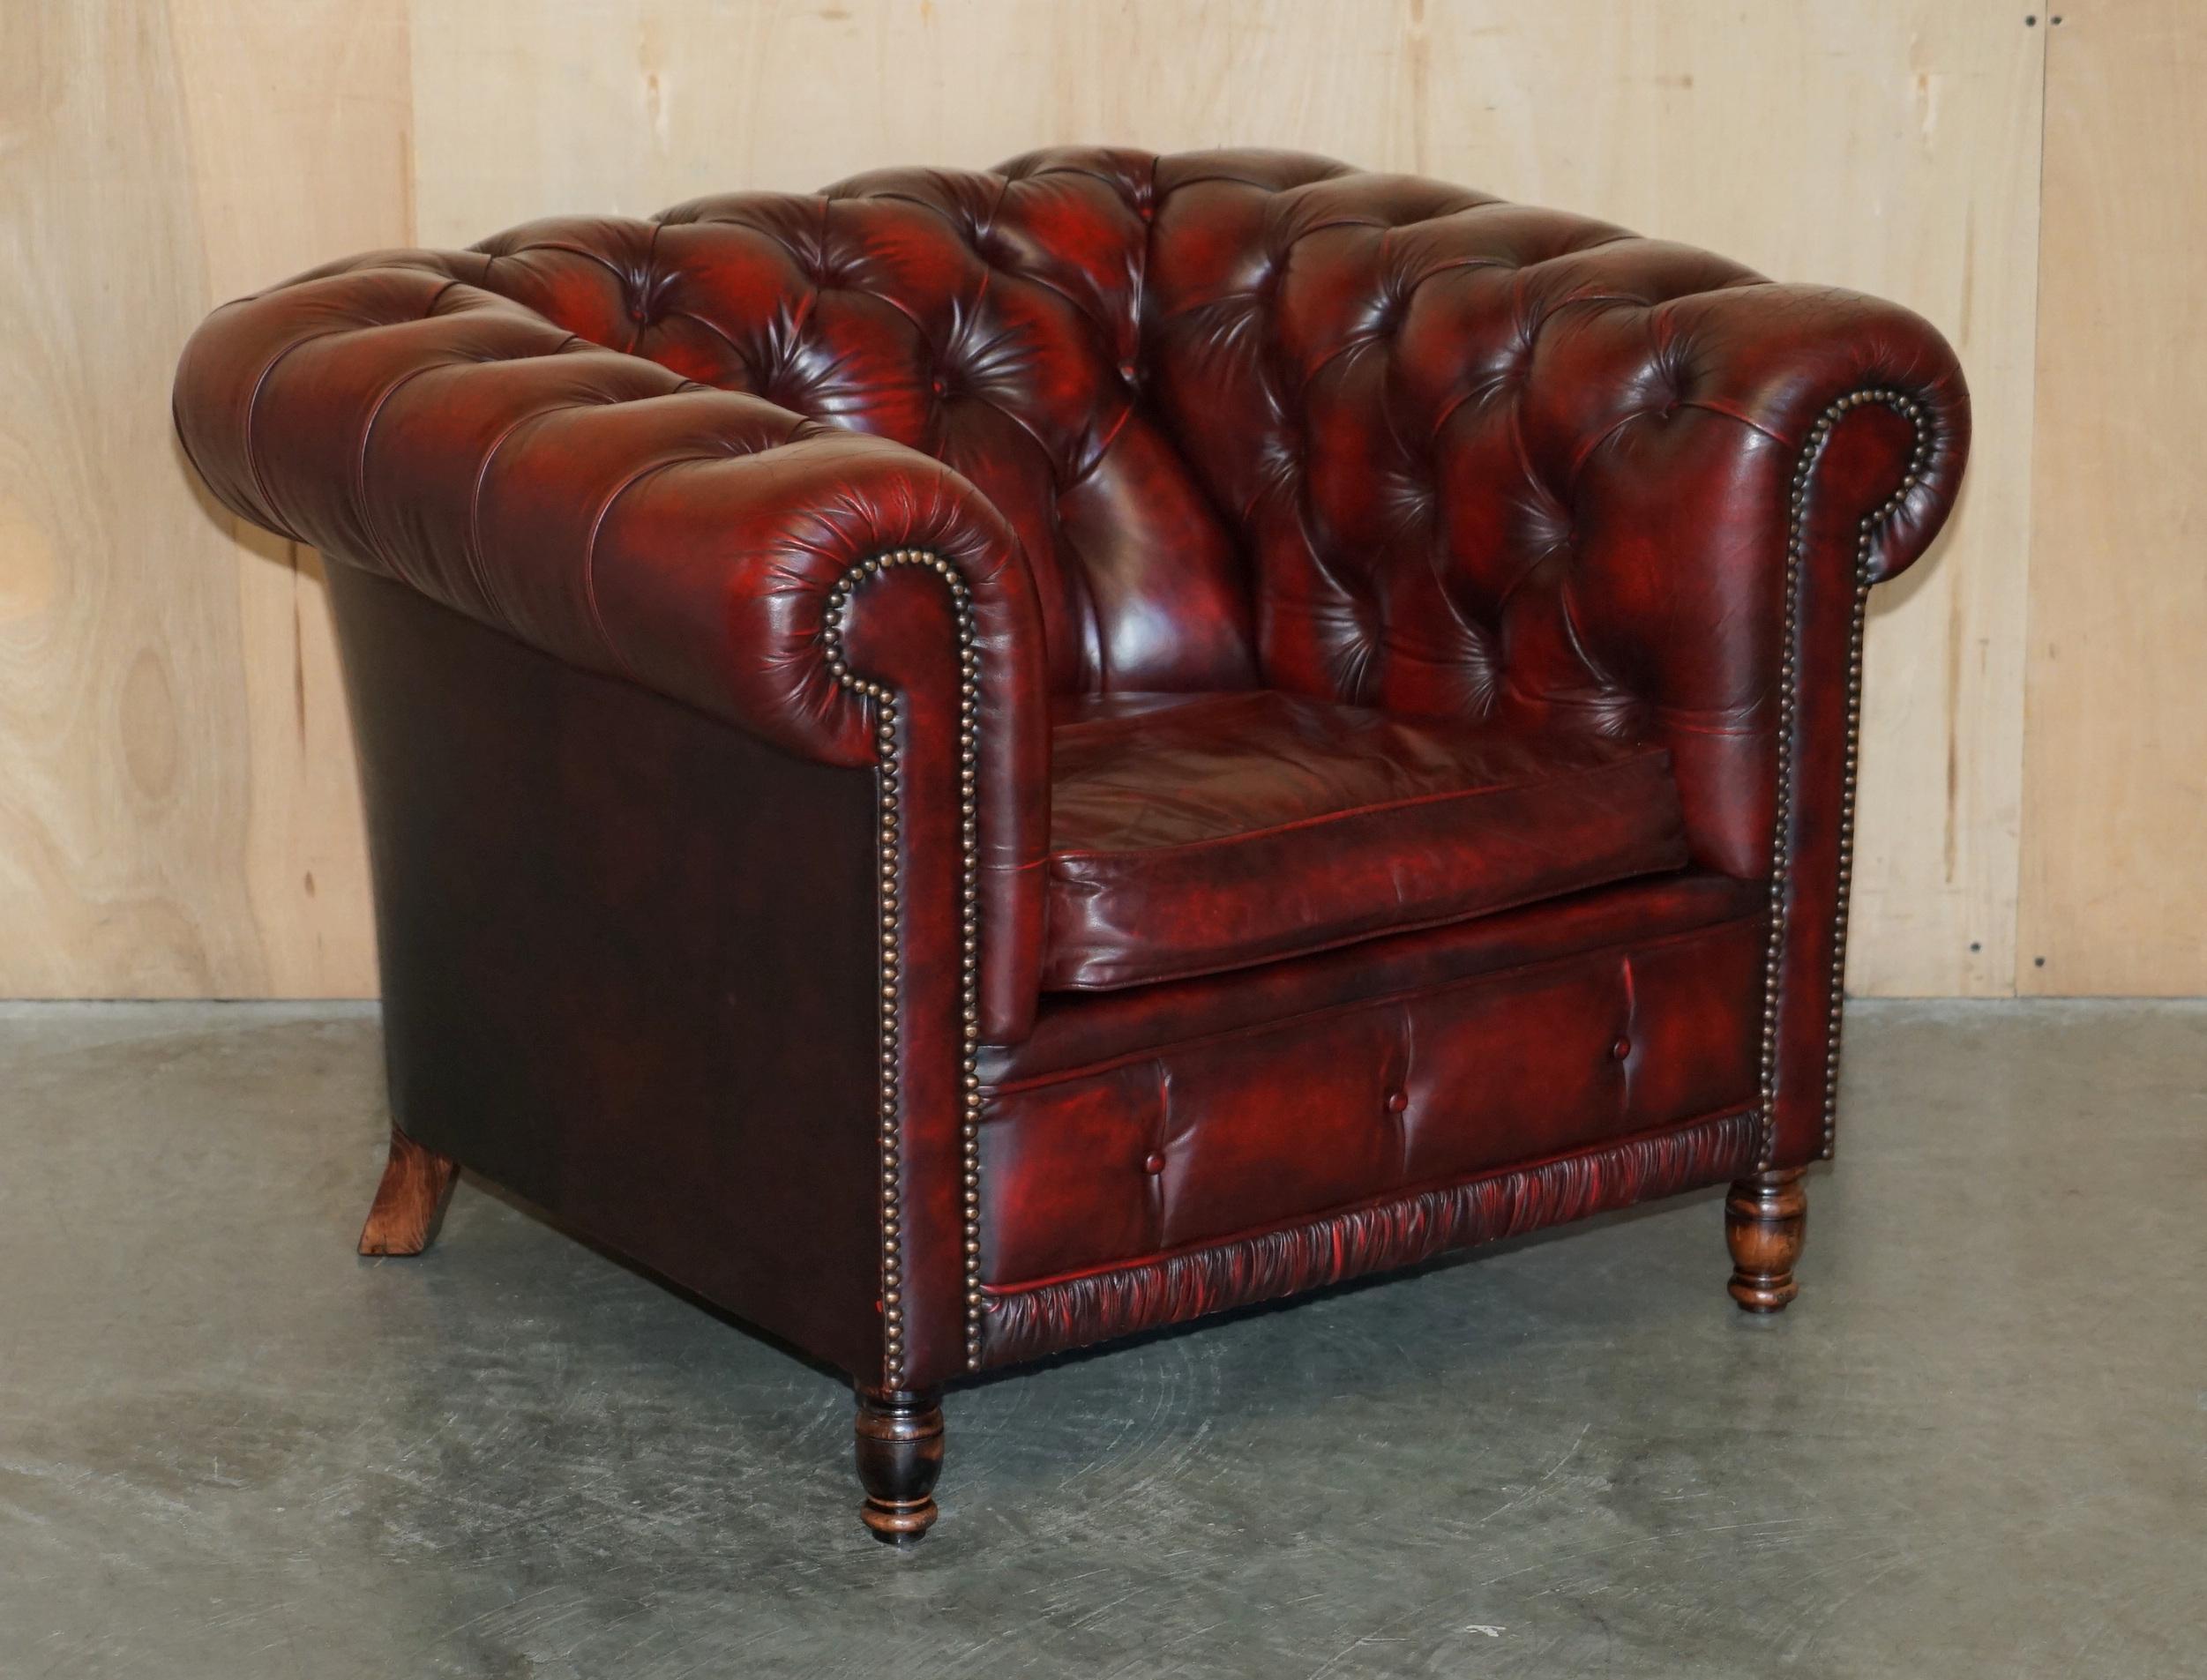 PAIR OF ViNTAGE OXBLOOD LEATHER CHESTERFIELD CLUB ARMCHAIRS WITH ELEGANT LEGS 7